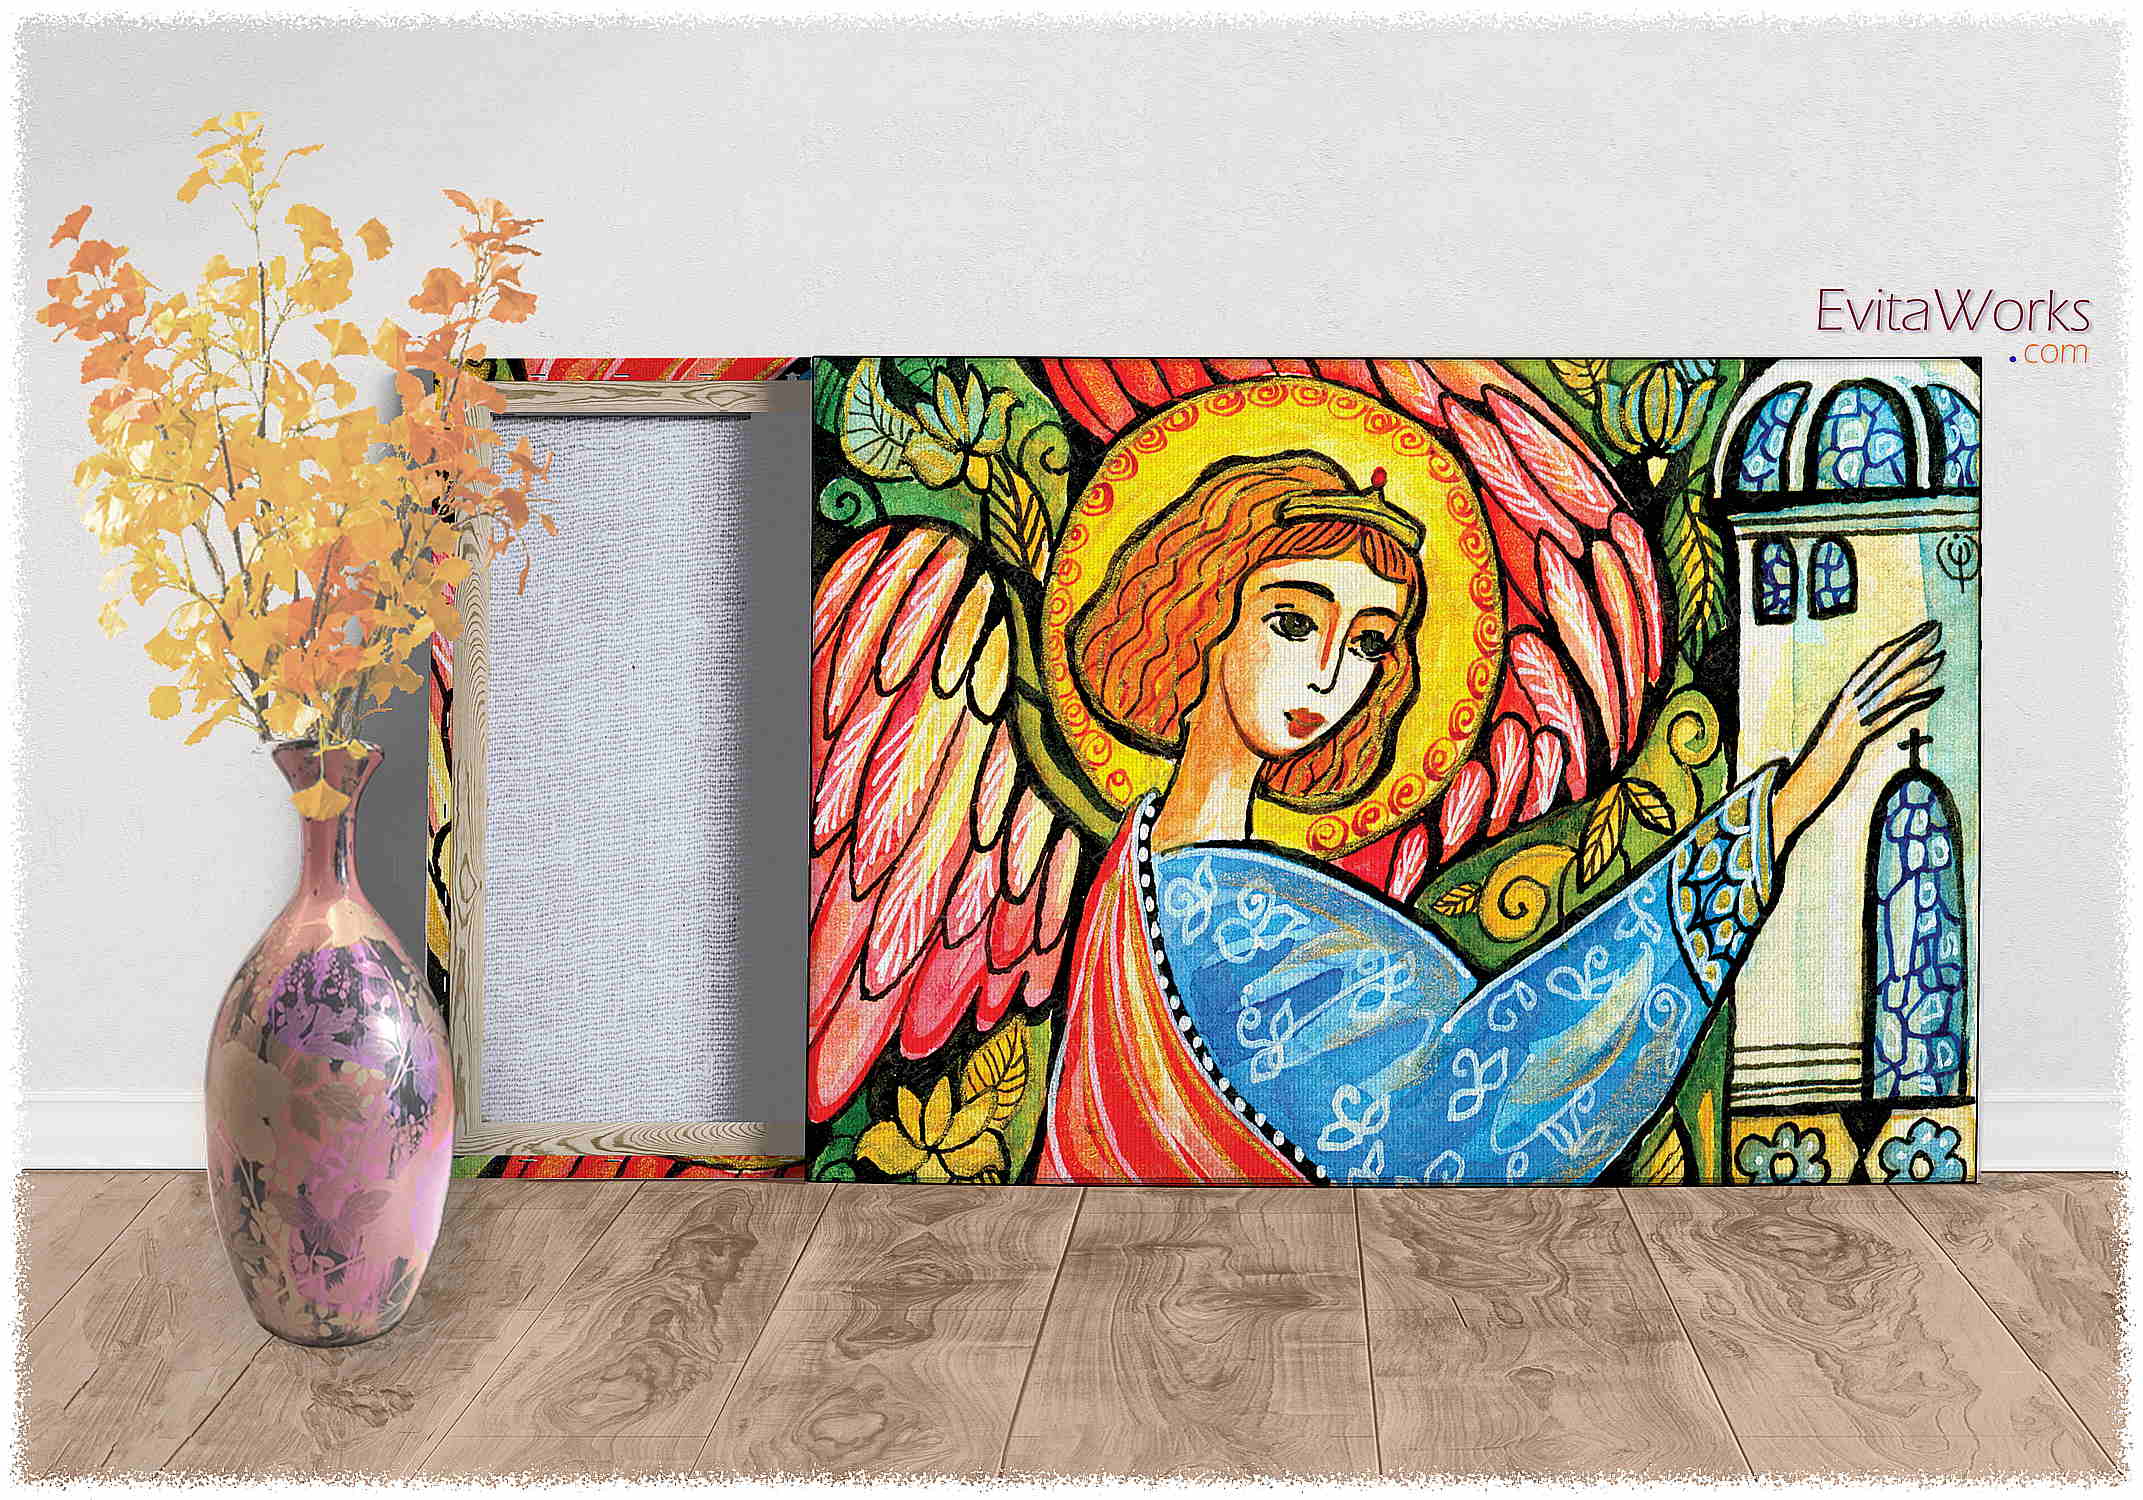 Hit to learn about "Angel 34, Christian art" on canvases